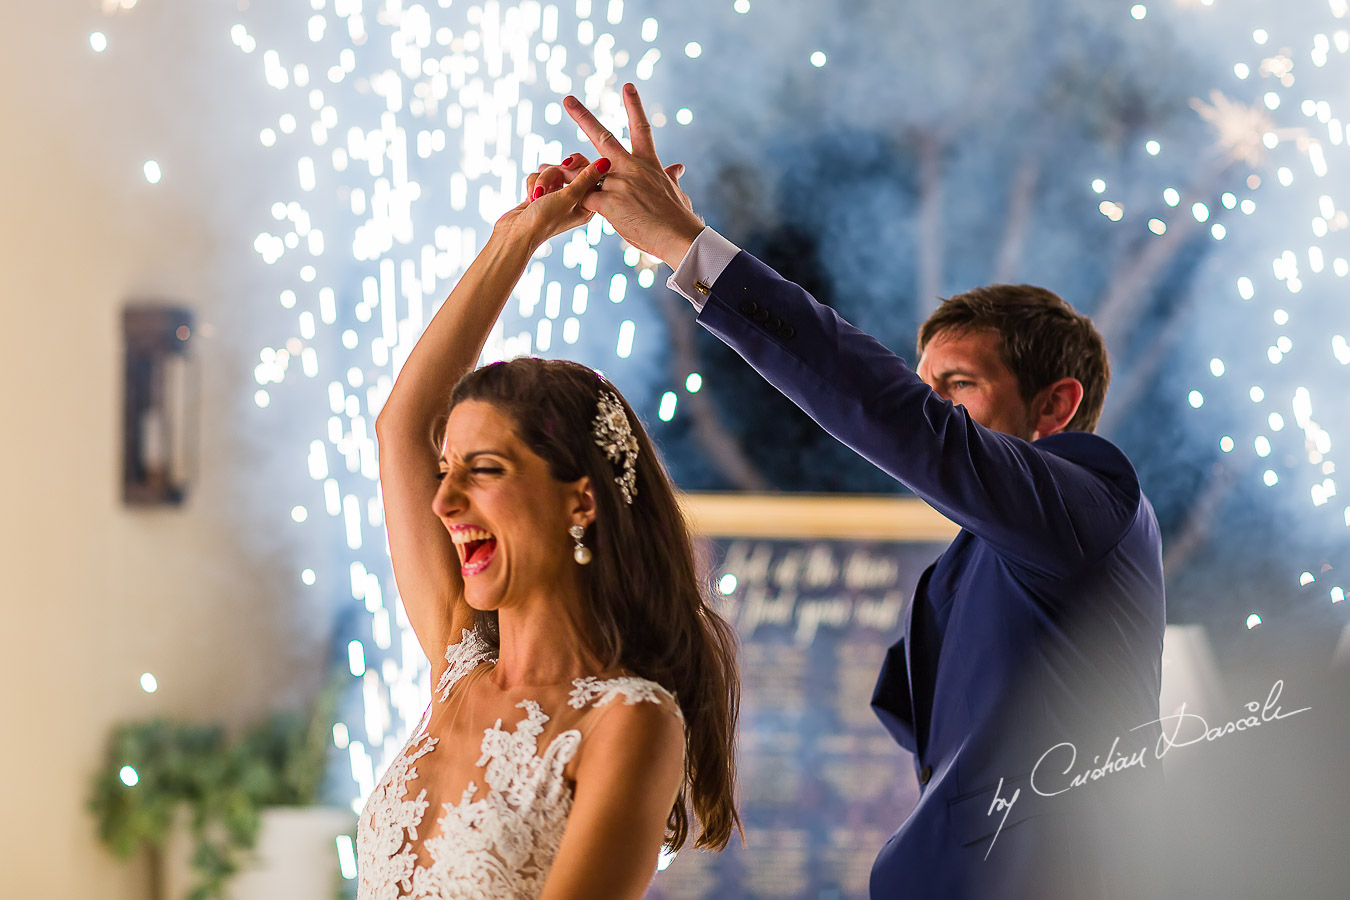 Simply beautiful wedding moments captured by Cristian Dascalu at an amazing Wedding at Elea Estate in Paphos, Cyprus.